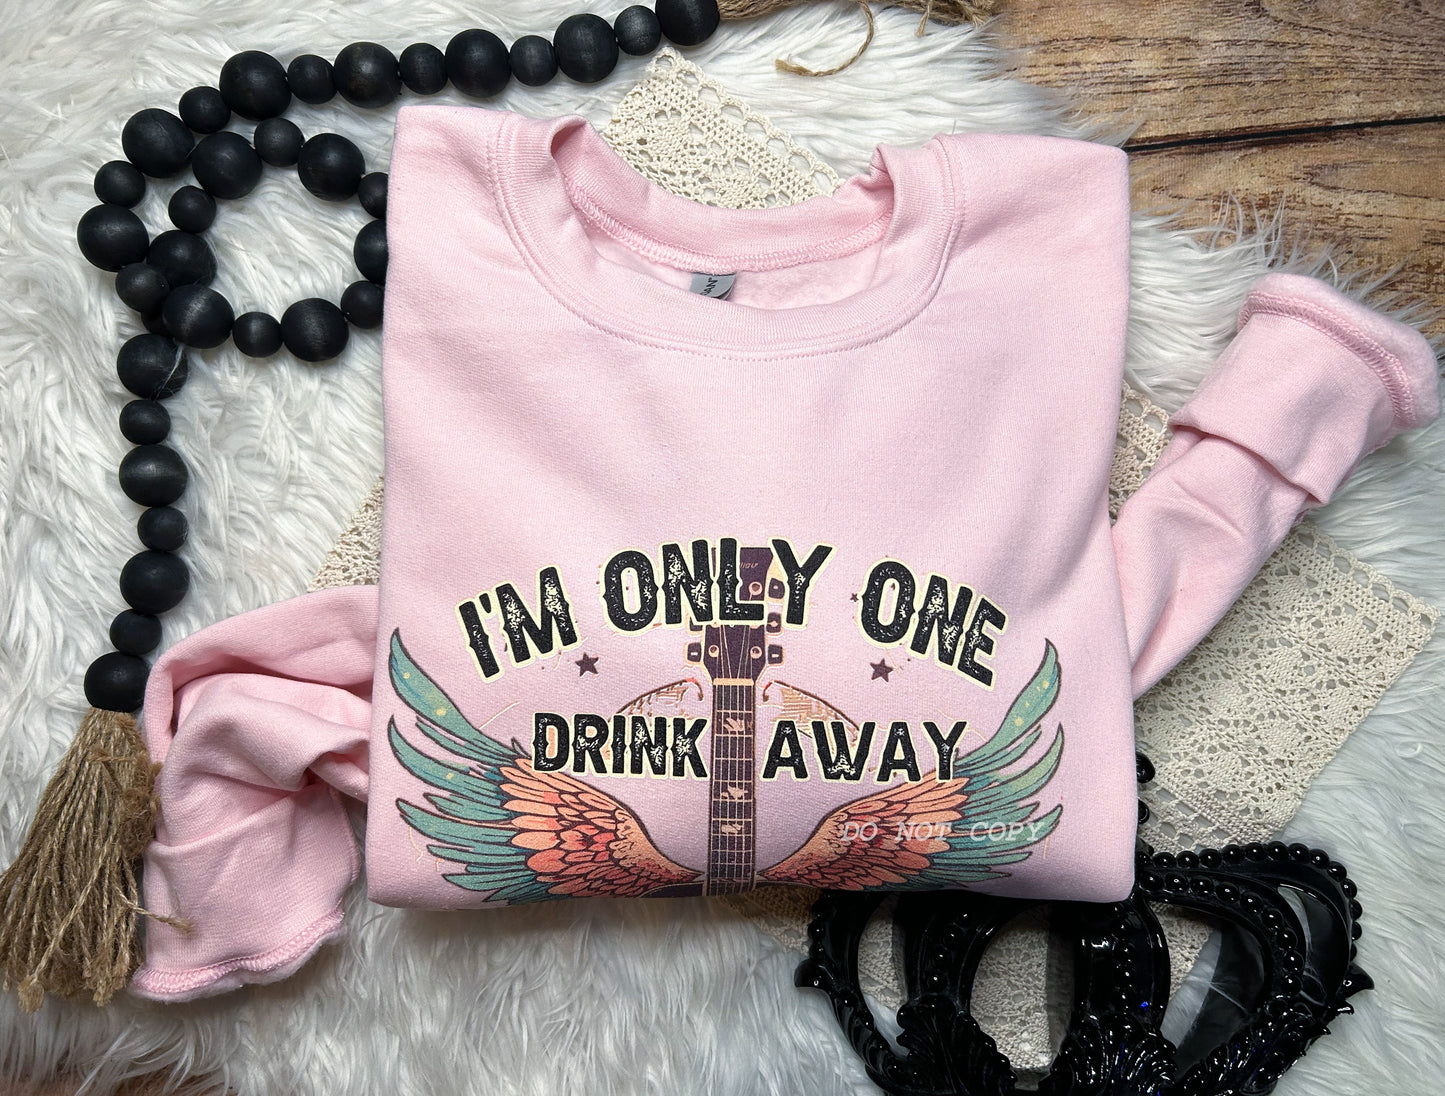 Only One Drink Away From The Devil Tshirt or Sweatshirt